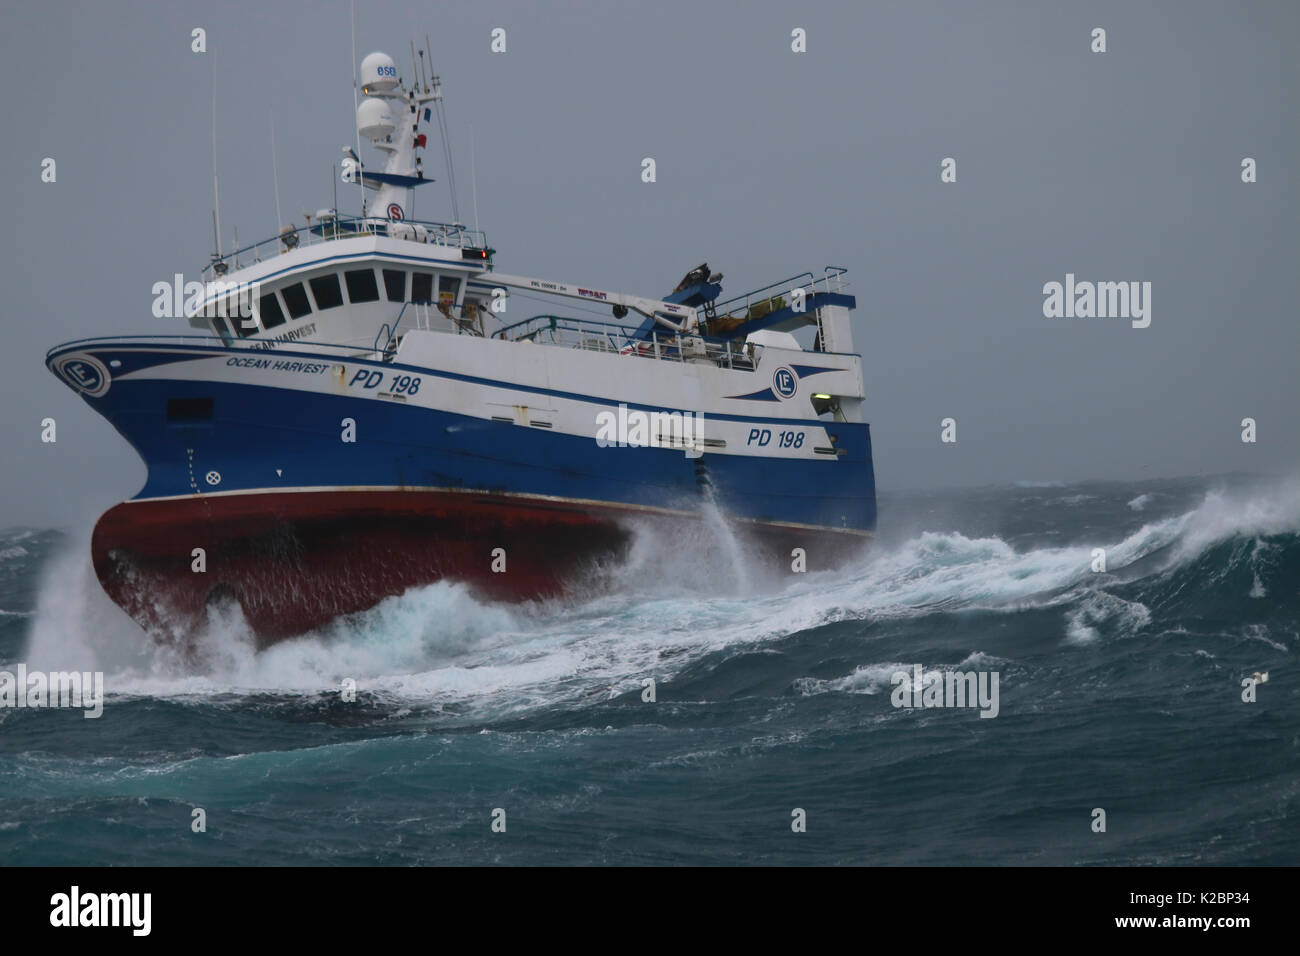 Fishing vessel 'Ocean Harvest' in heavy swells on the North Sea, January 2016.  Property released. Stock Photo